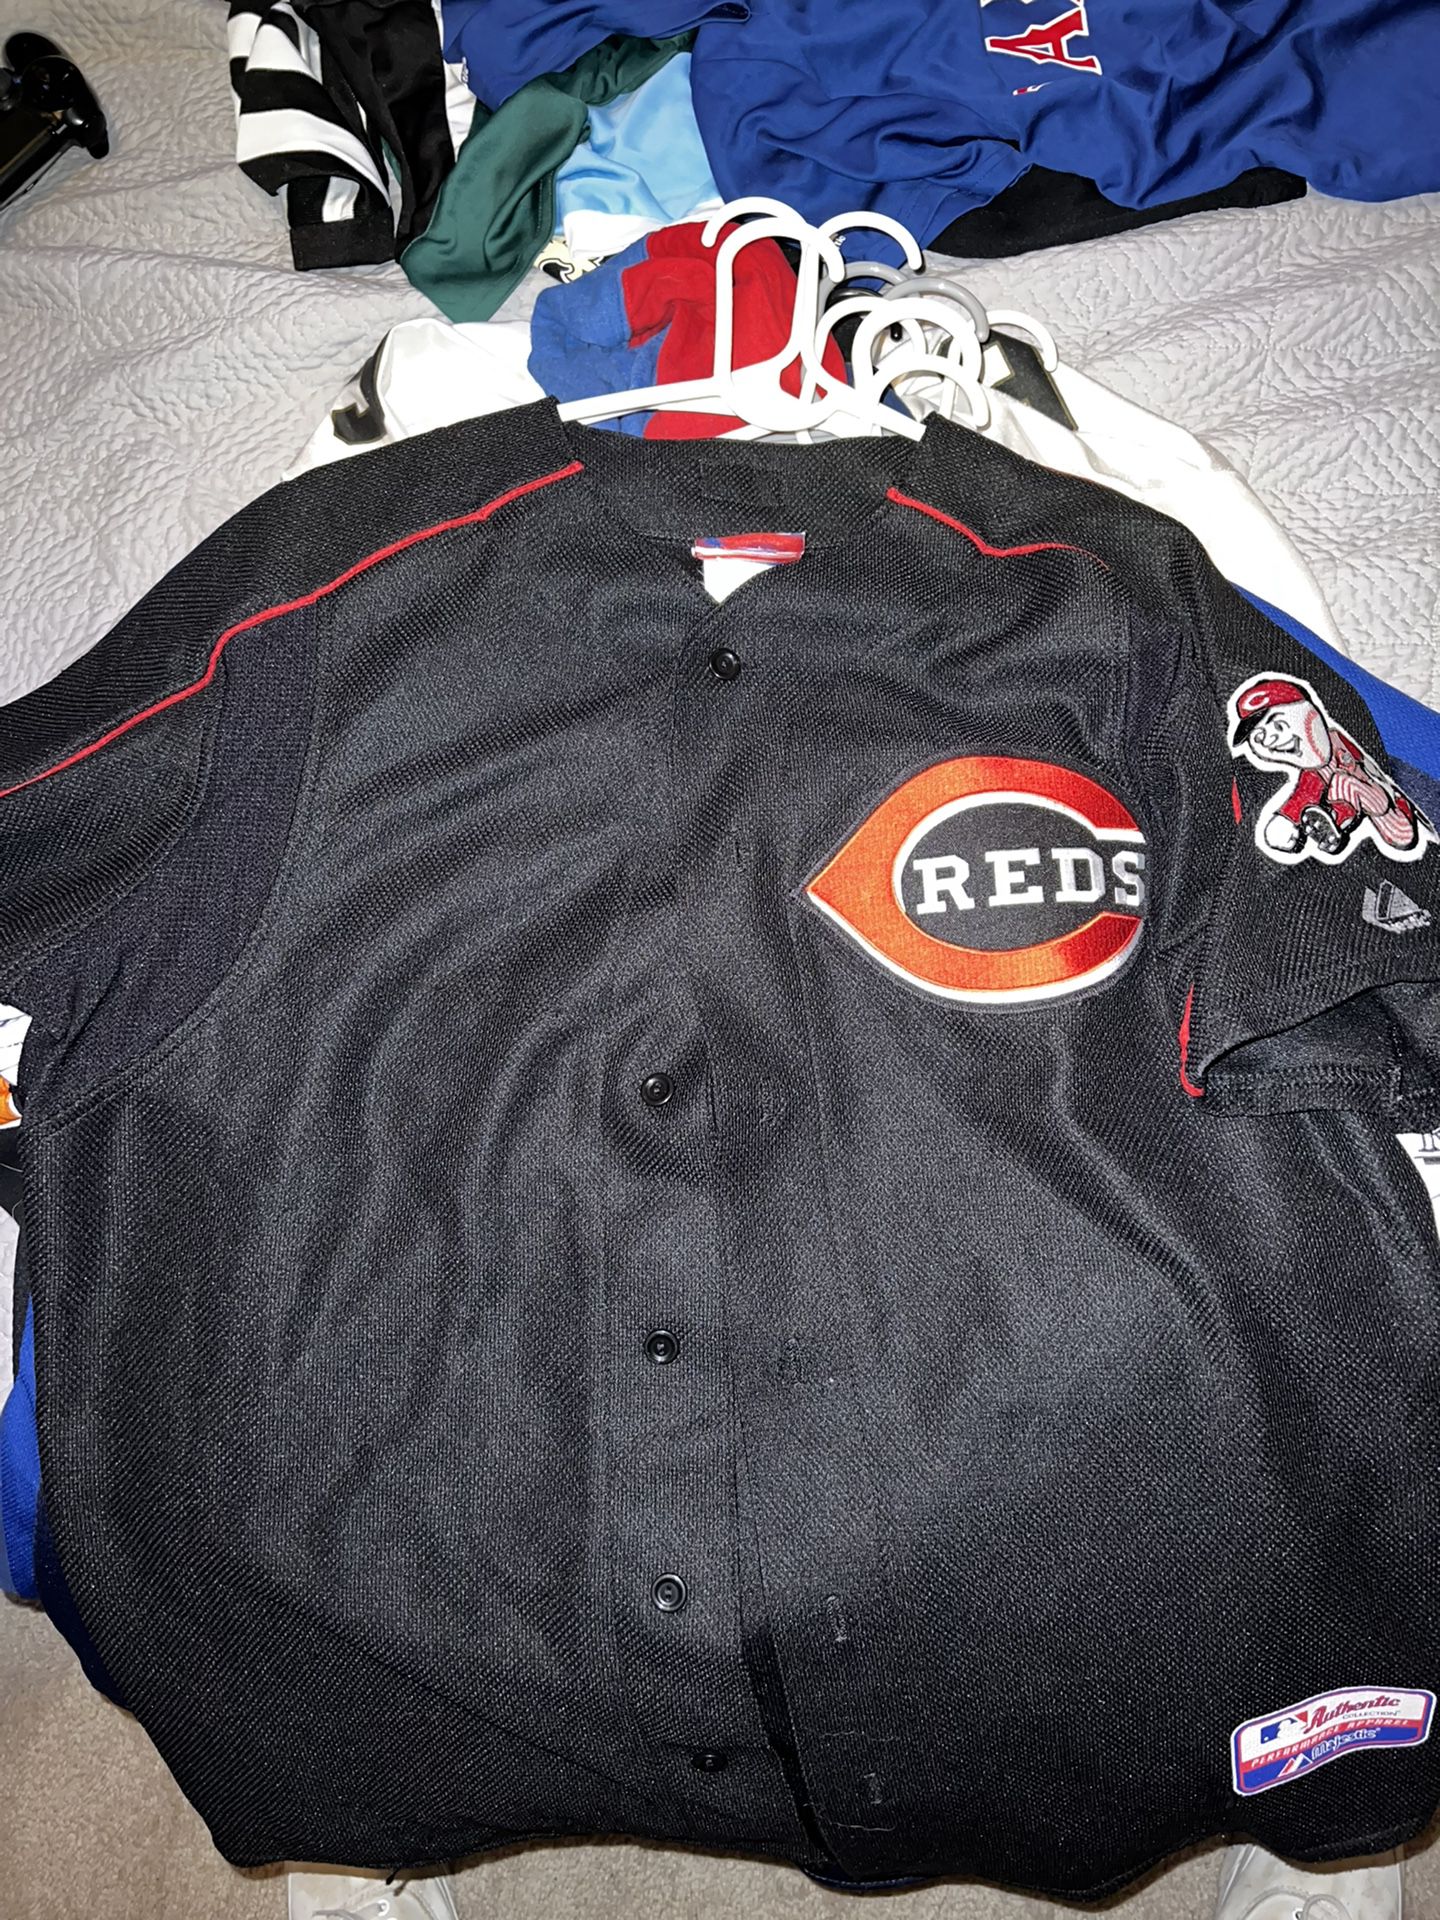 Mlb Reds Jersey With embroidered patches 